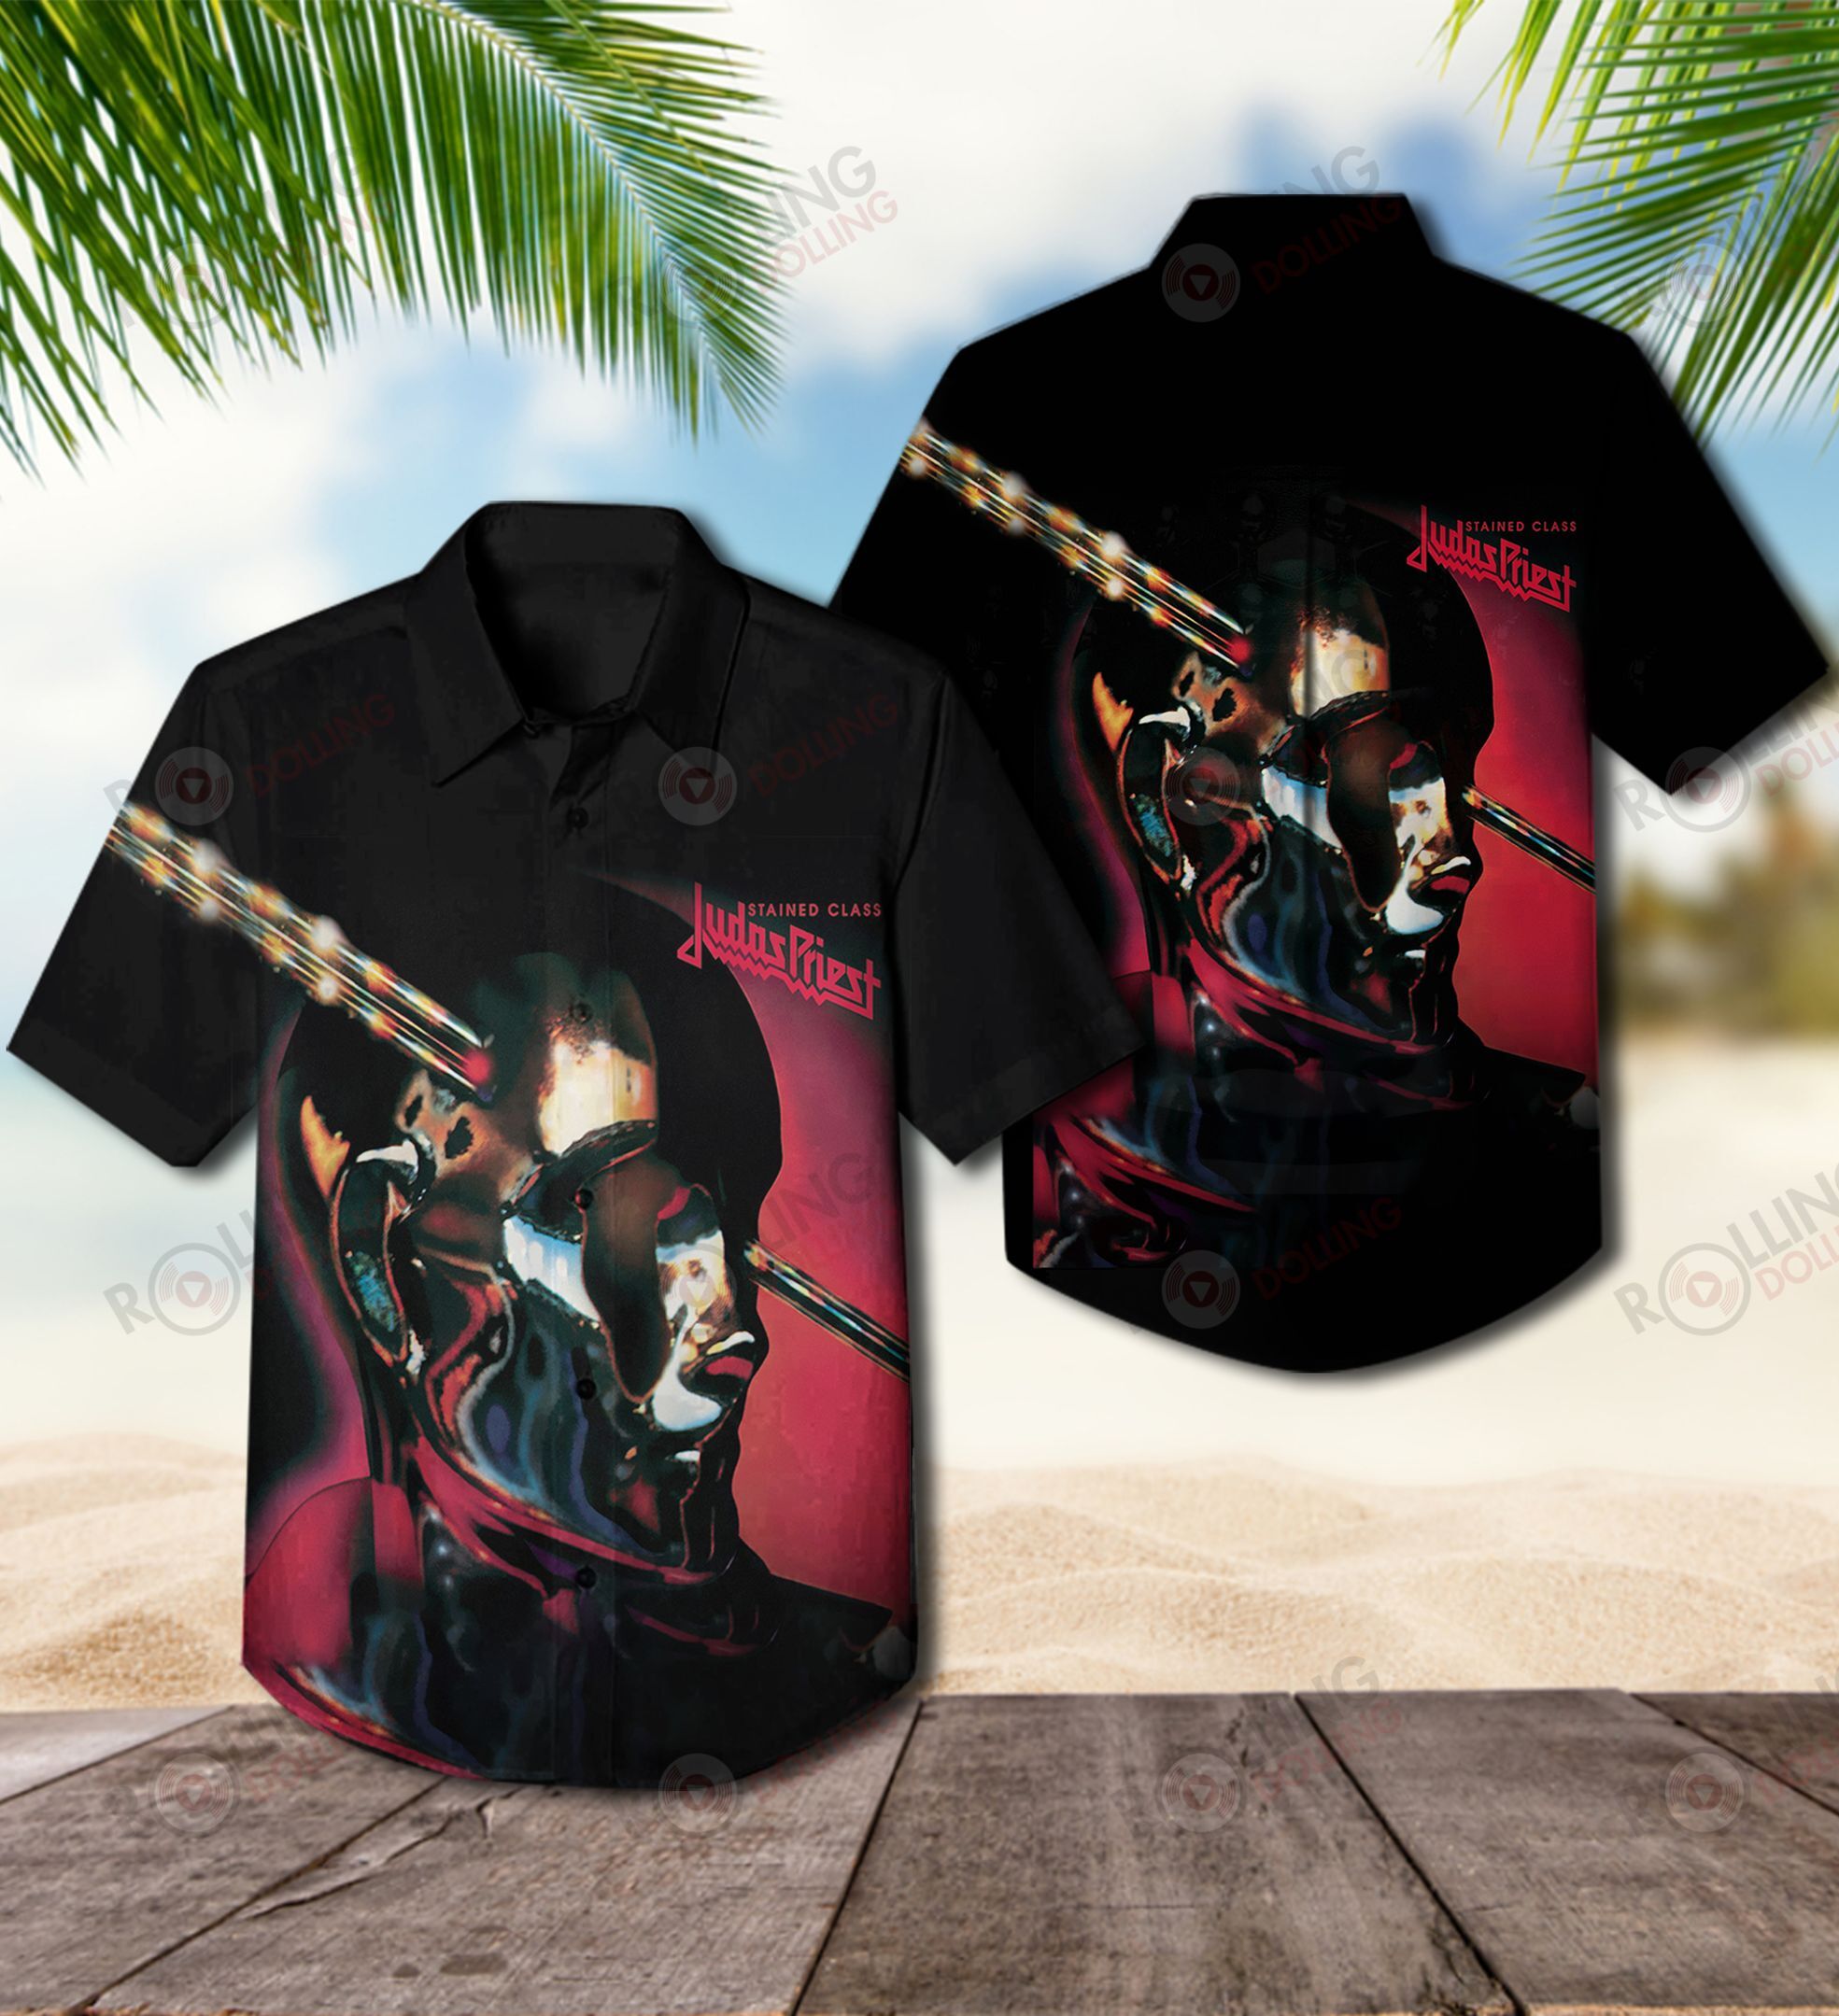 For summer, consider wearing This Amazing Hawaiian Shirt shirt in our store 87